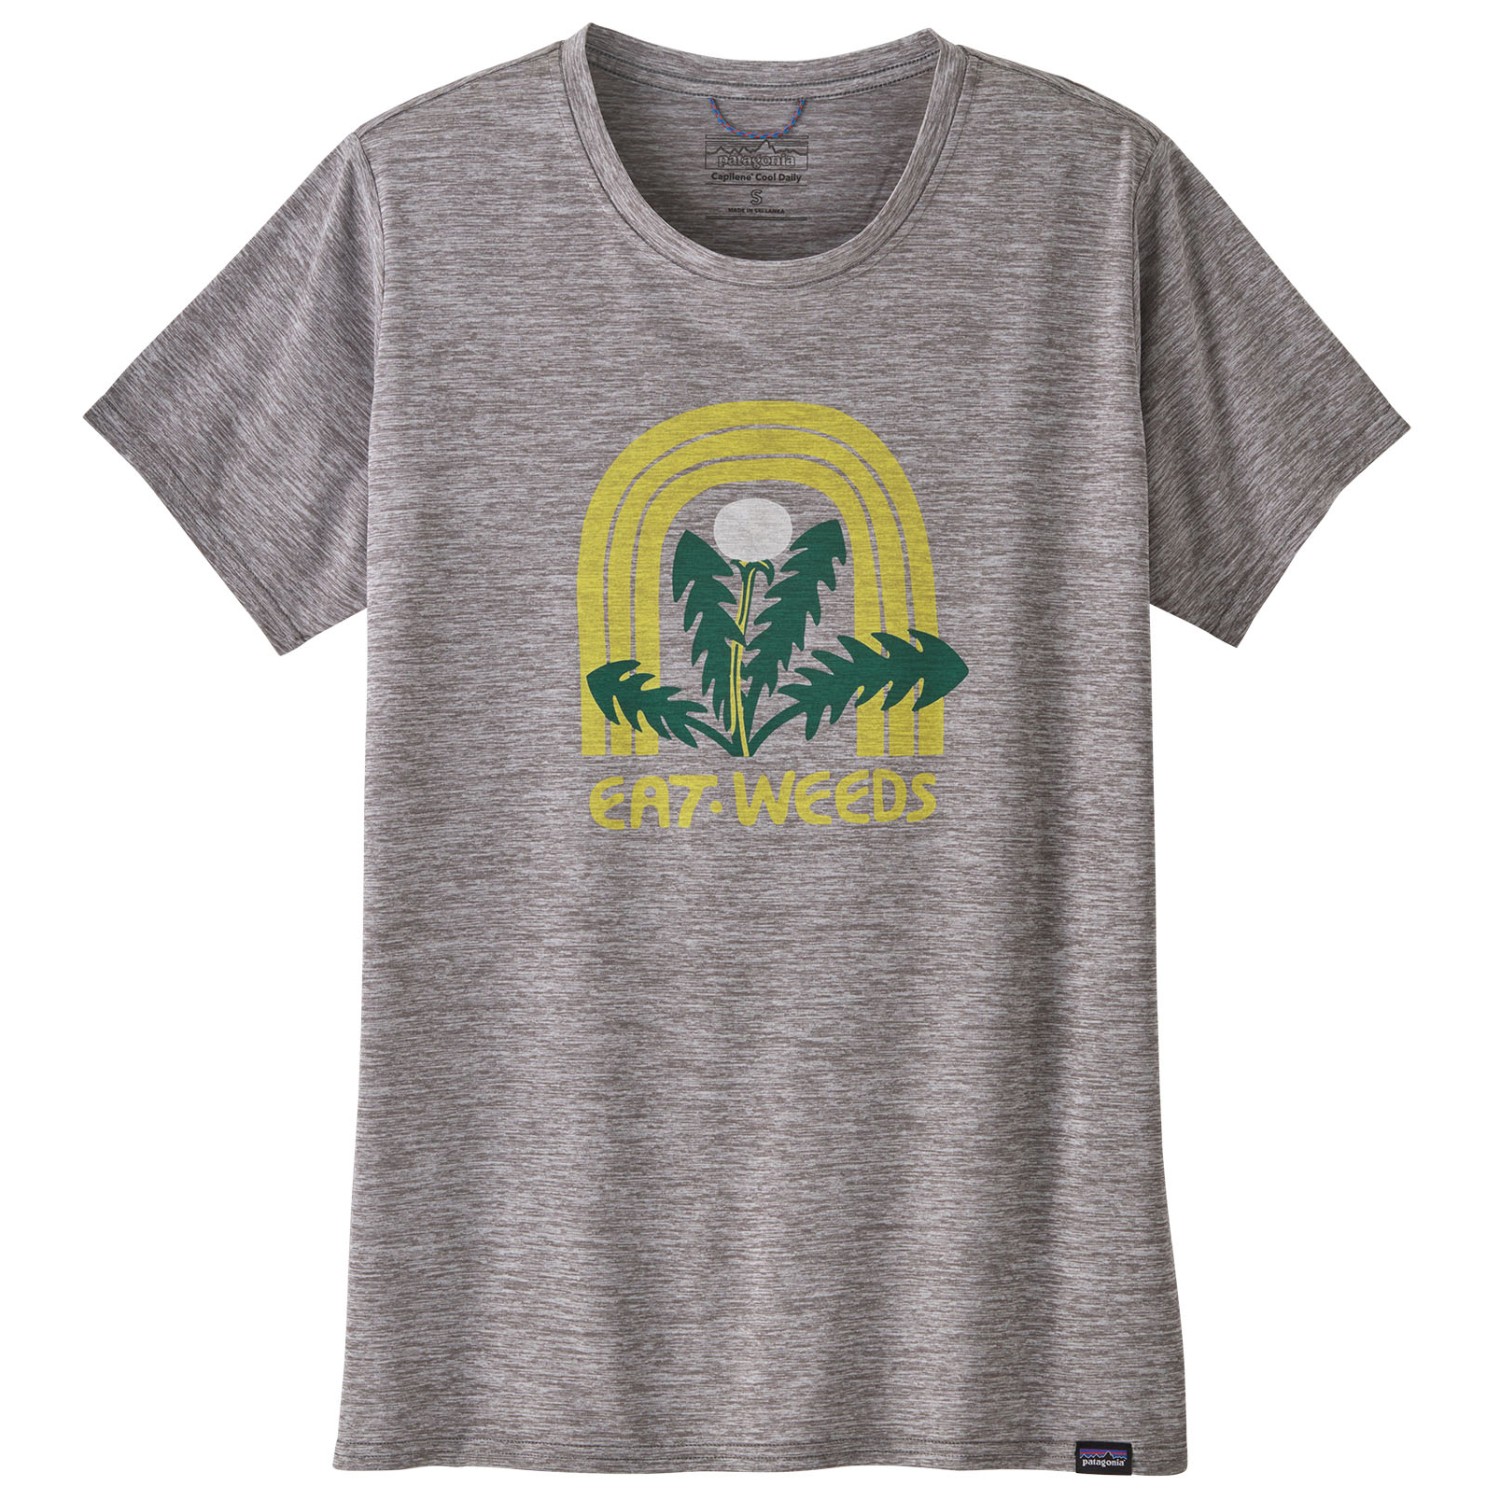 Функциональная рубашка Patagonia Women's Cap Cool Daily Graphic Shirt Lands, цвет Salad Greens/Feather Grey feather printing t shirts women clothes 2020 summer tshirts cotton women graphic tee shirt femme shirt ropa mujer verano